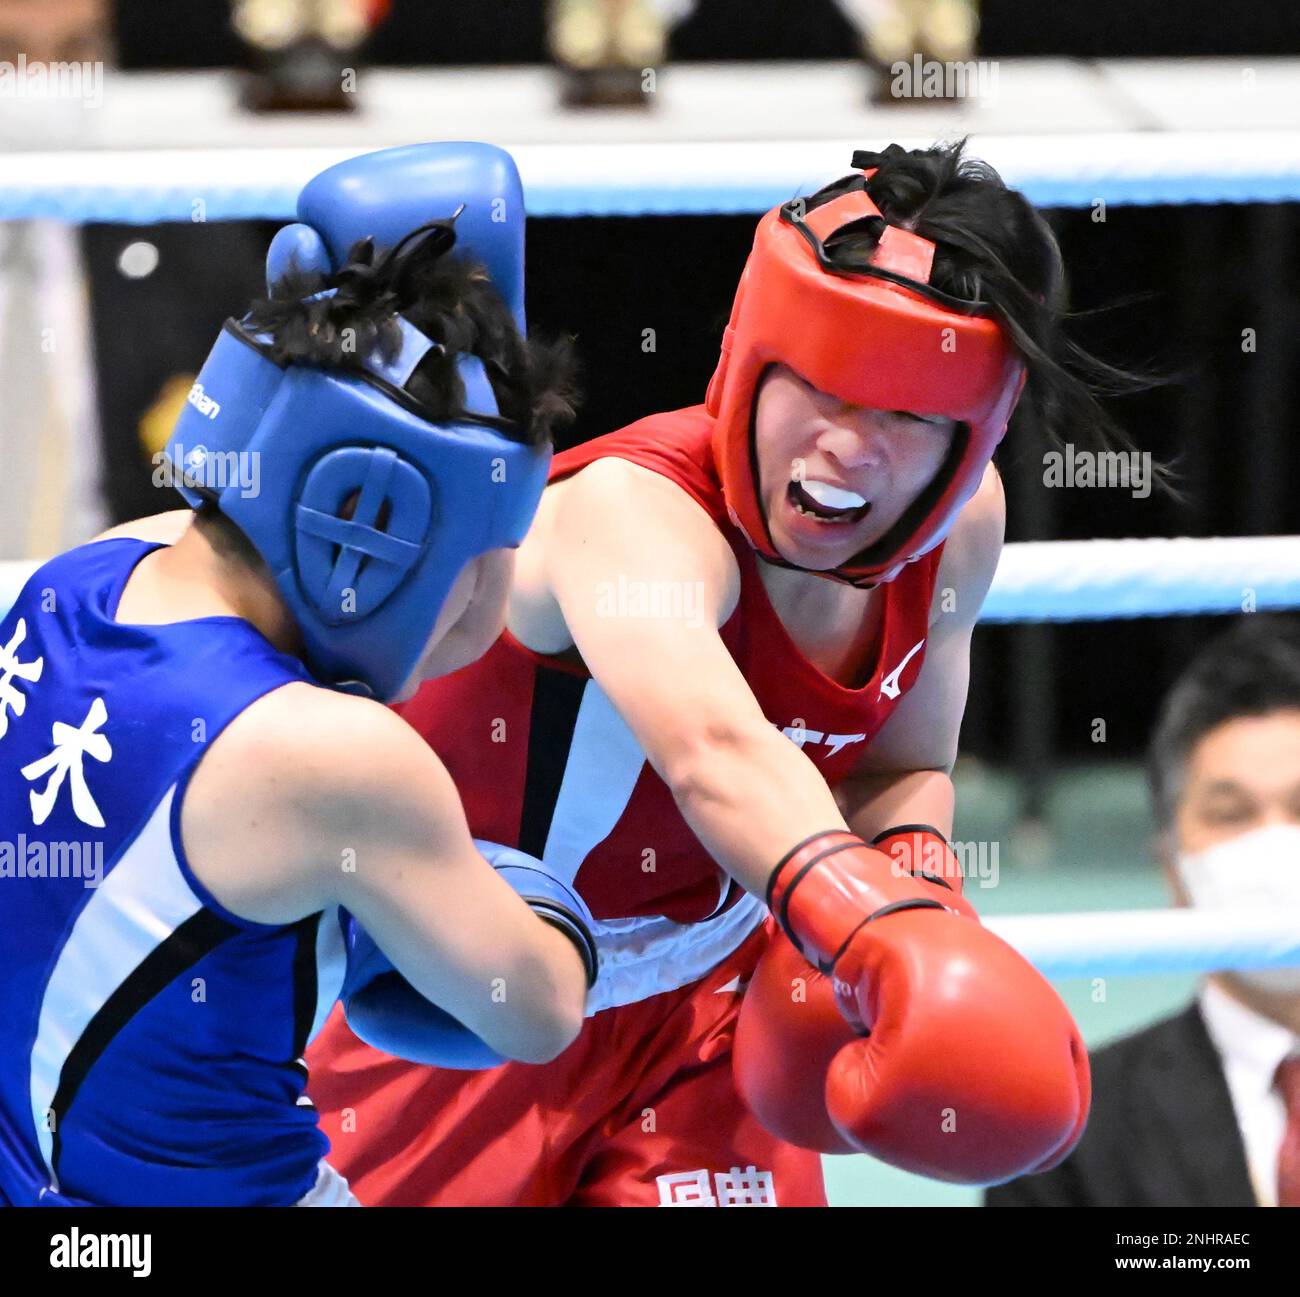 Japanese boxer Sena Irie (red) delivers a punch during the women's  featherweight final match of 2022 All Japan Boxing Championship at Sumida  City Gymnasium in Sumida ward, Tokyo on November 27, 2022.